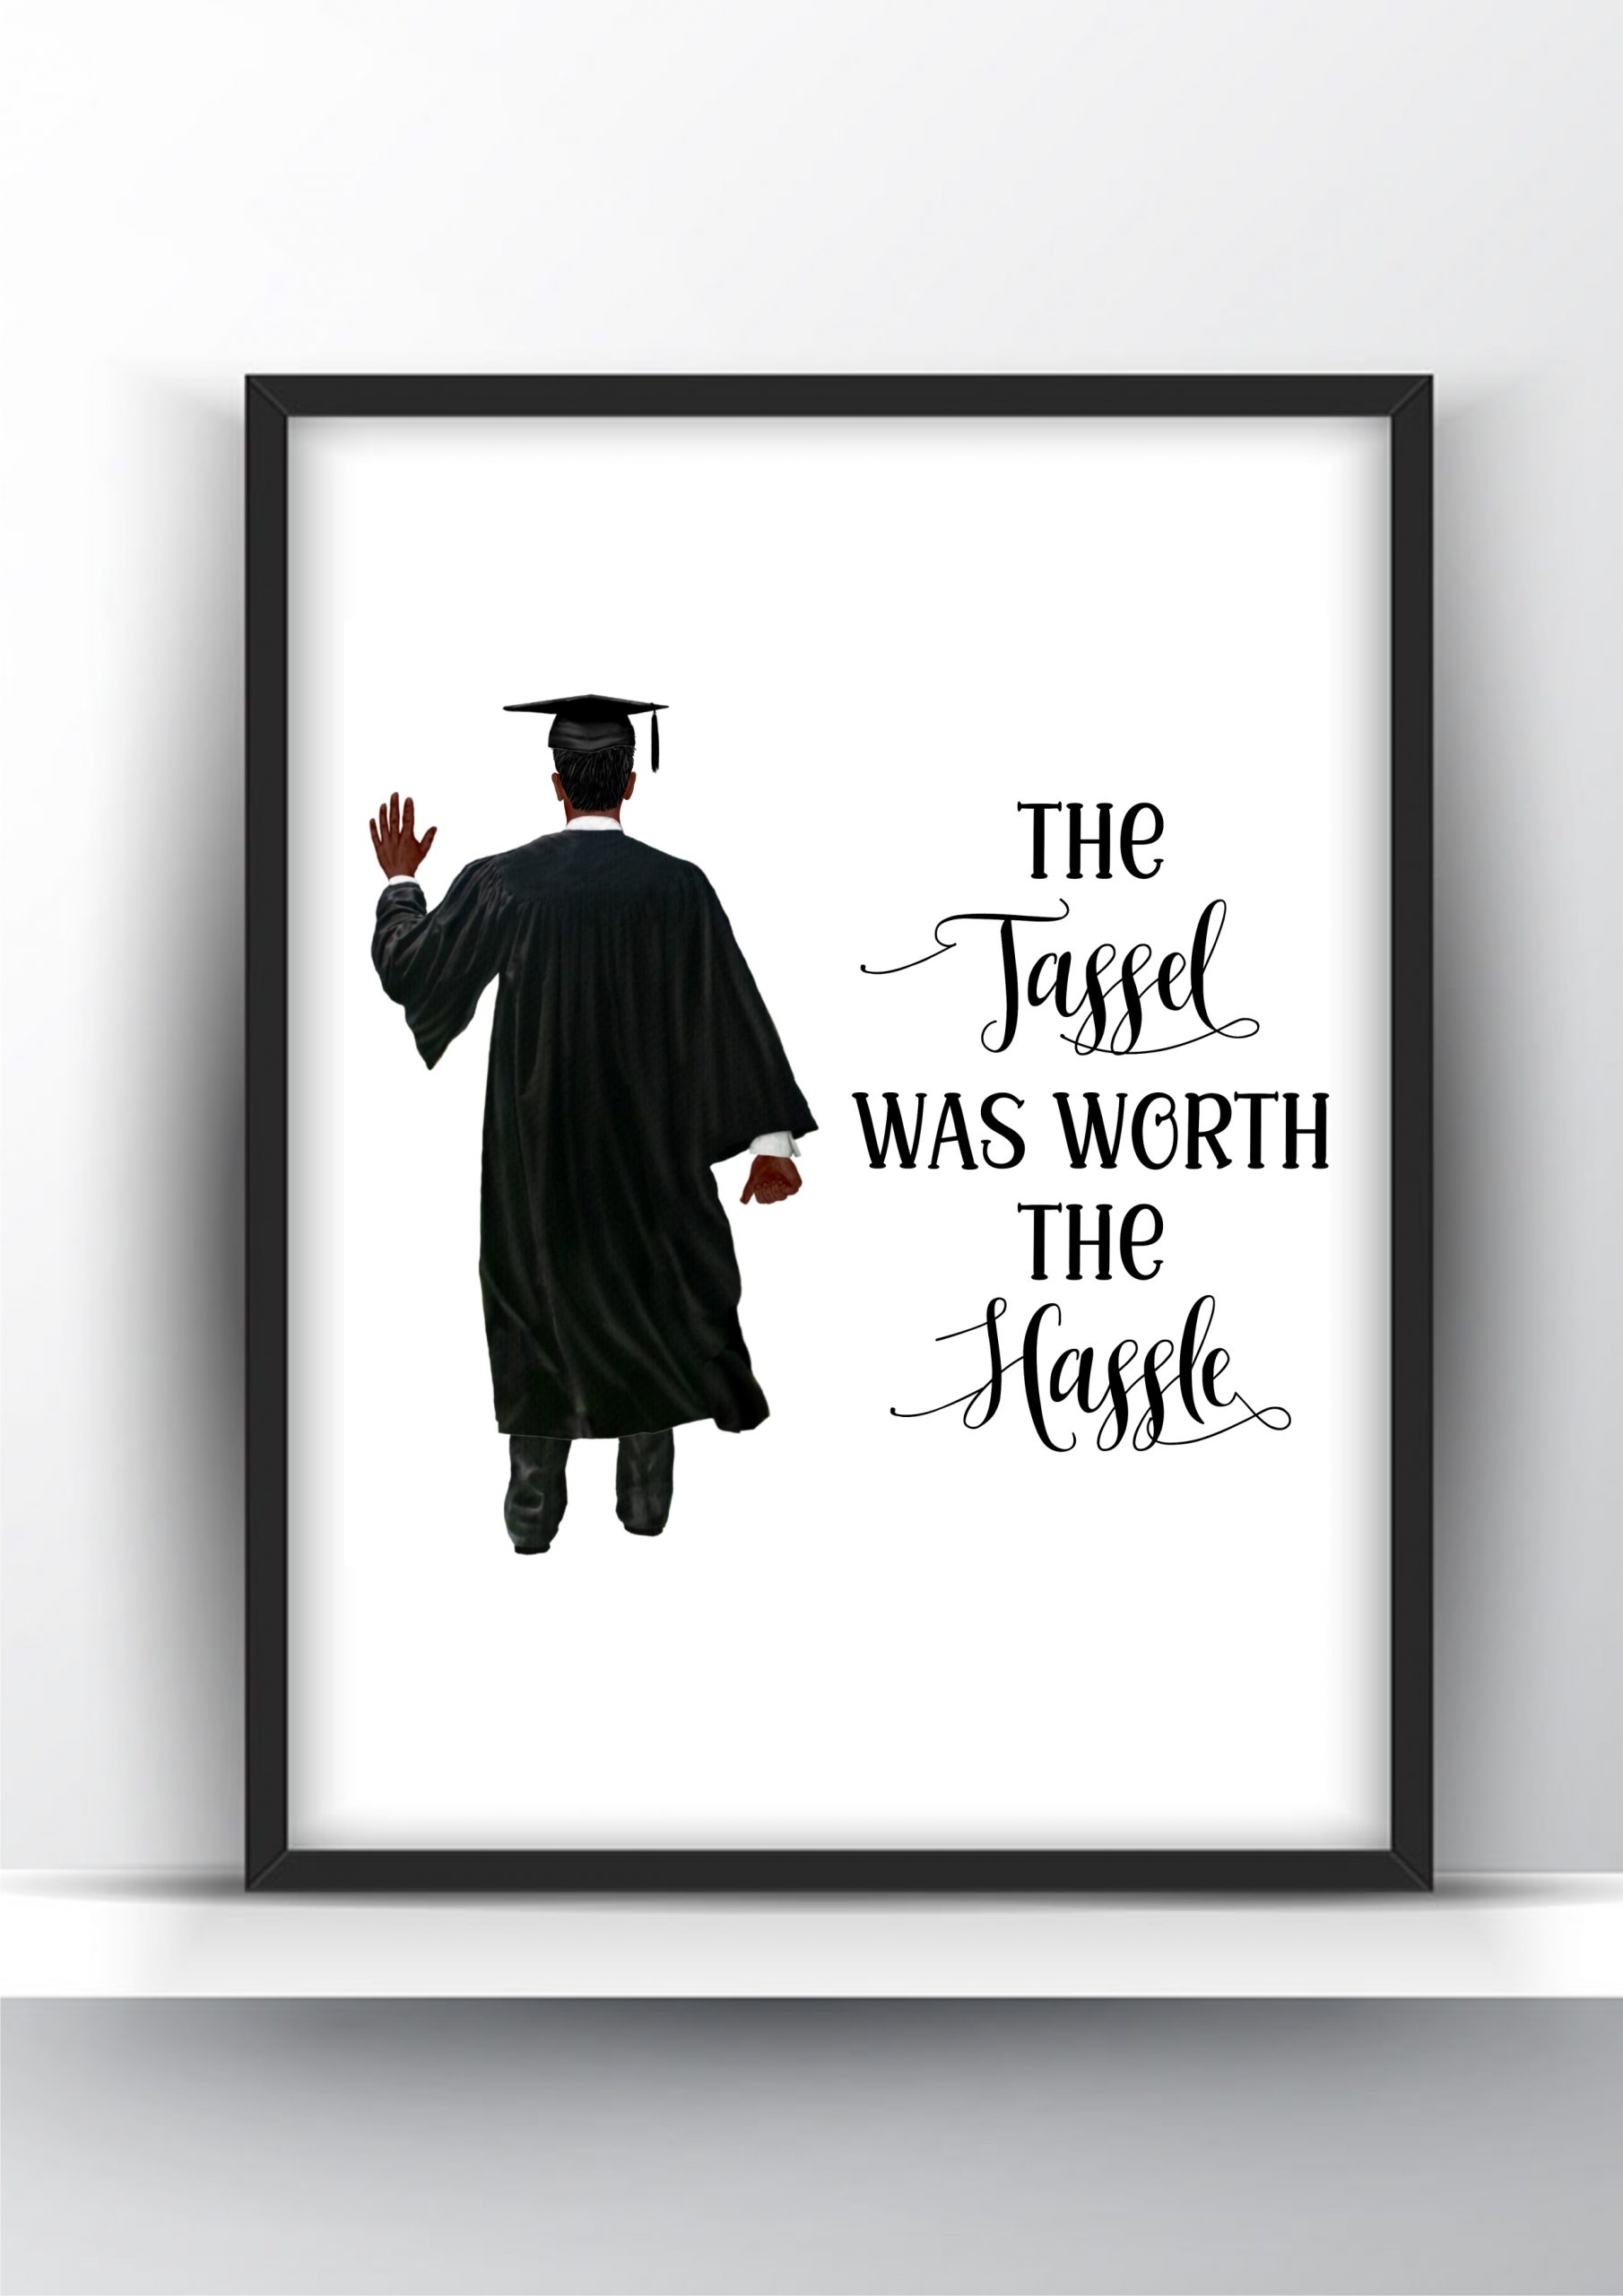 Graduation 2019 Personalised Name Wall Art Funny Tassel Hassle Gift Students